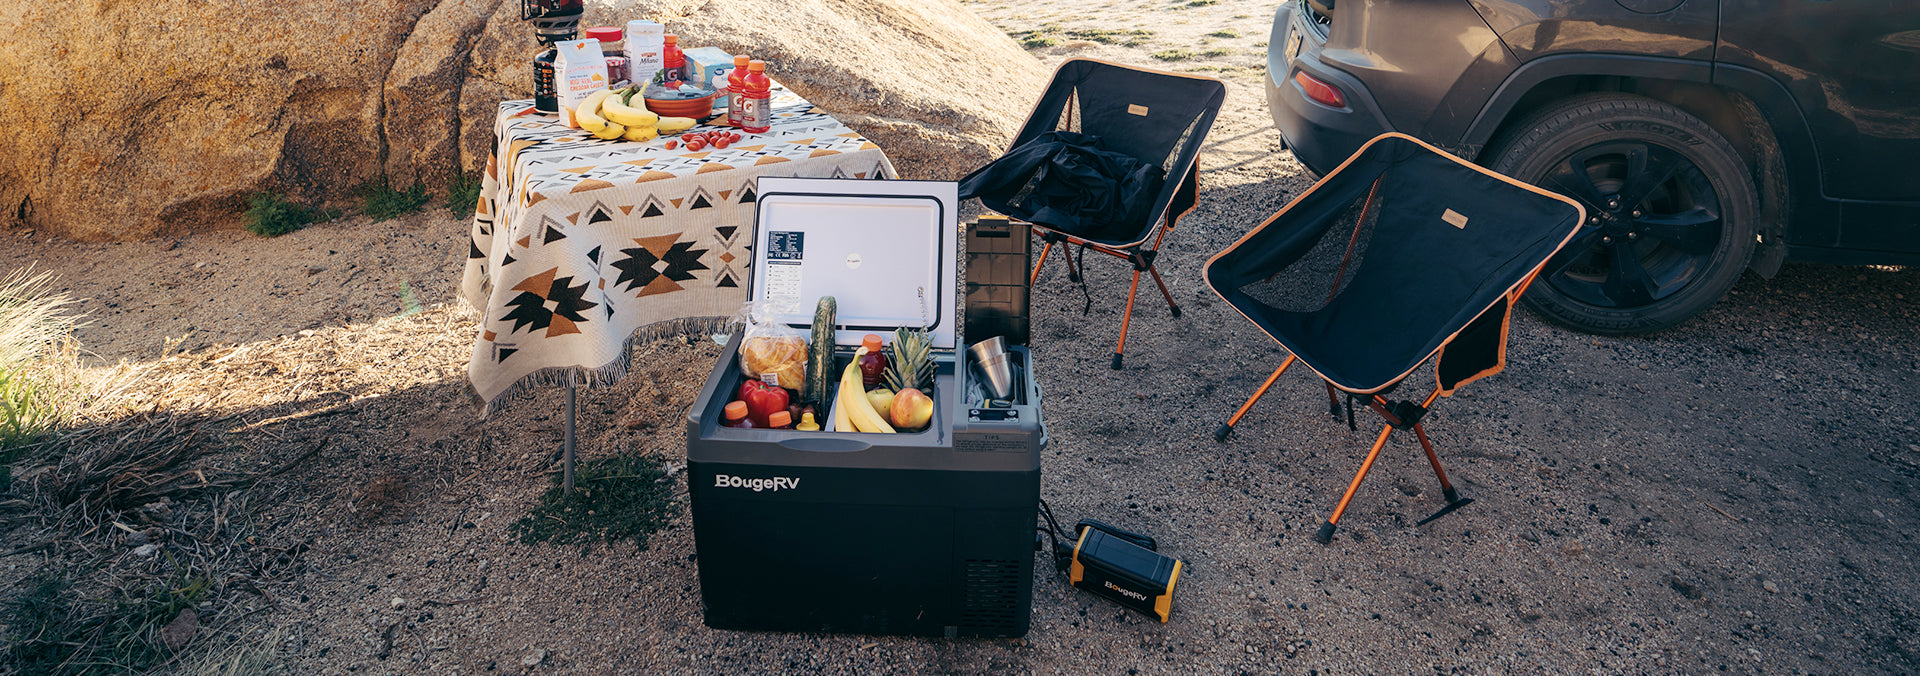 BougeRV Portable Fridge Review: Is This Cheap Vanlife Fridge Worth It?